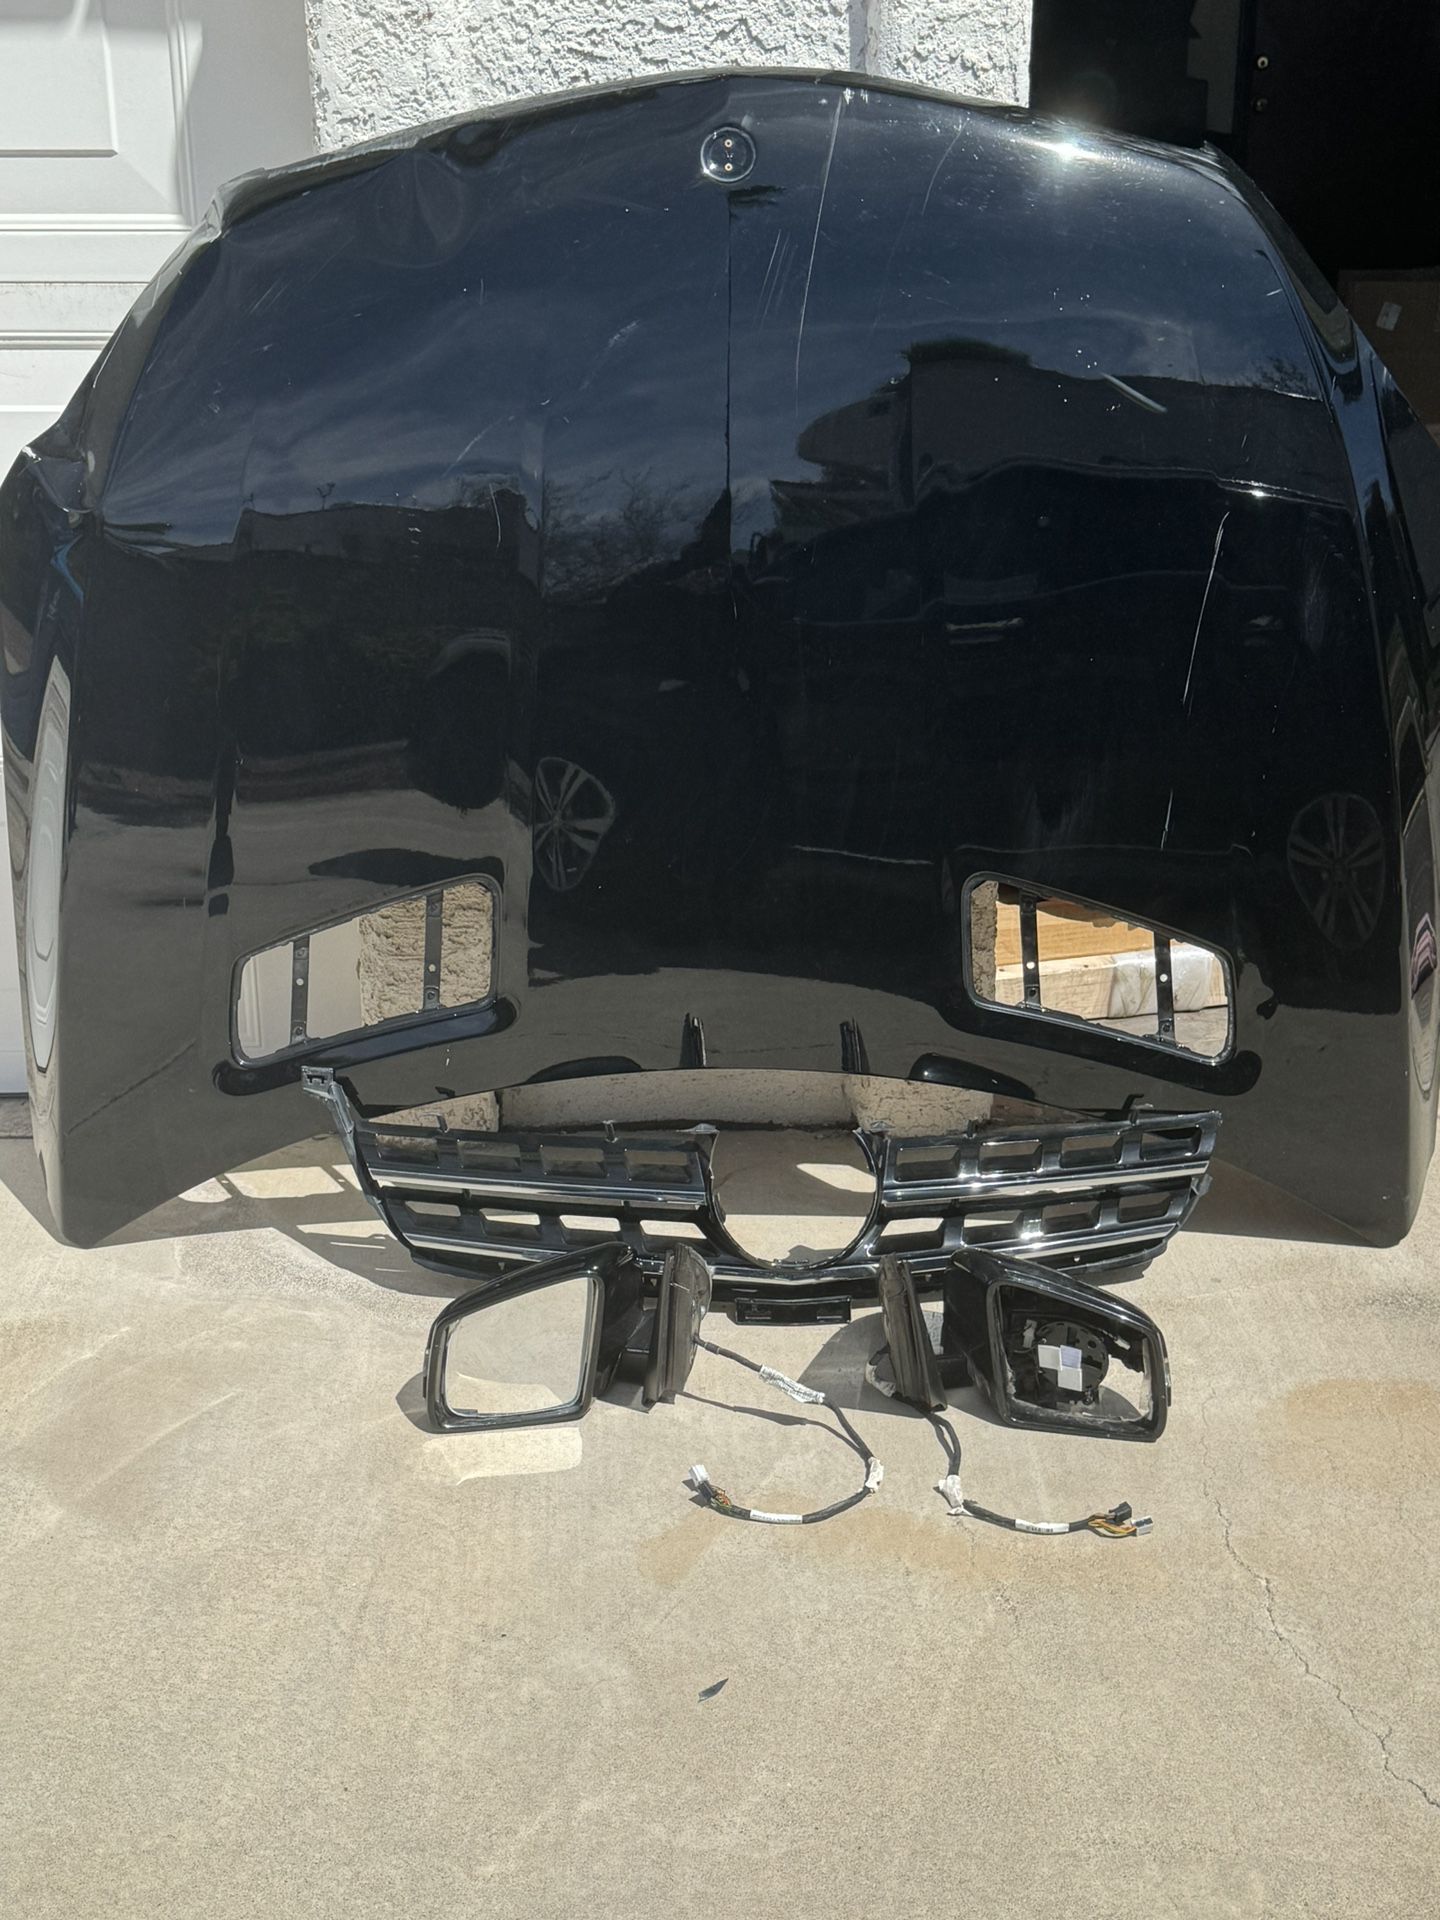 2015 Mercedes ML350 Hood, Grill, And Exterior Rearview Mirrors